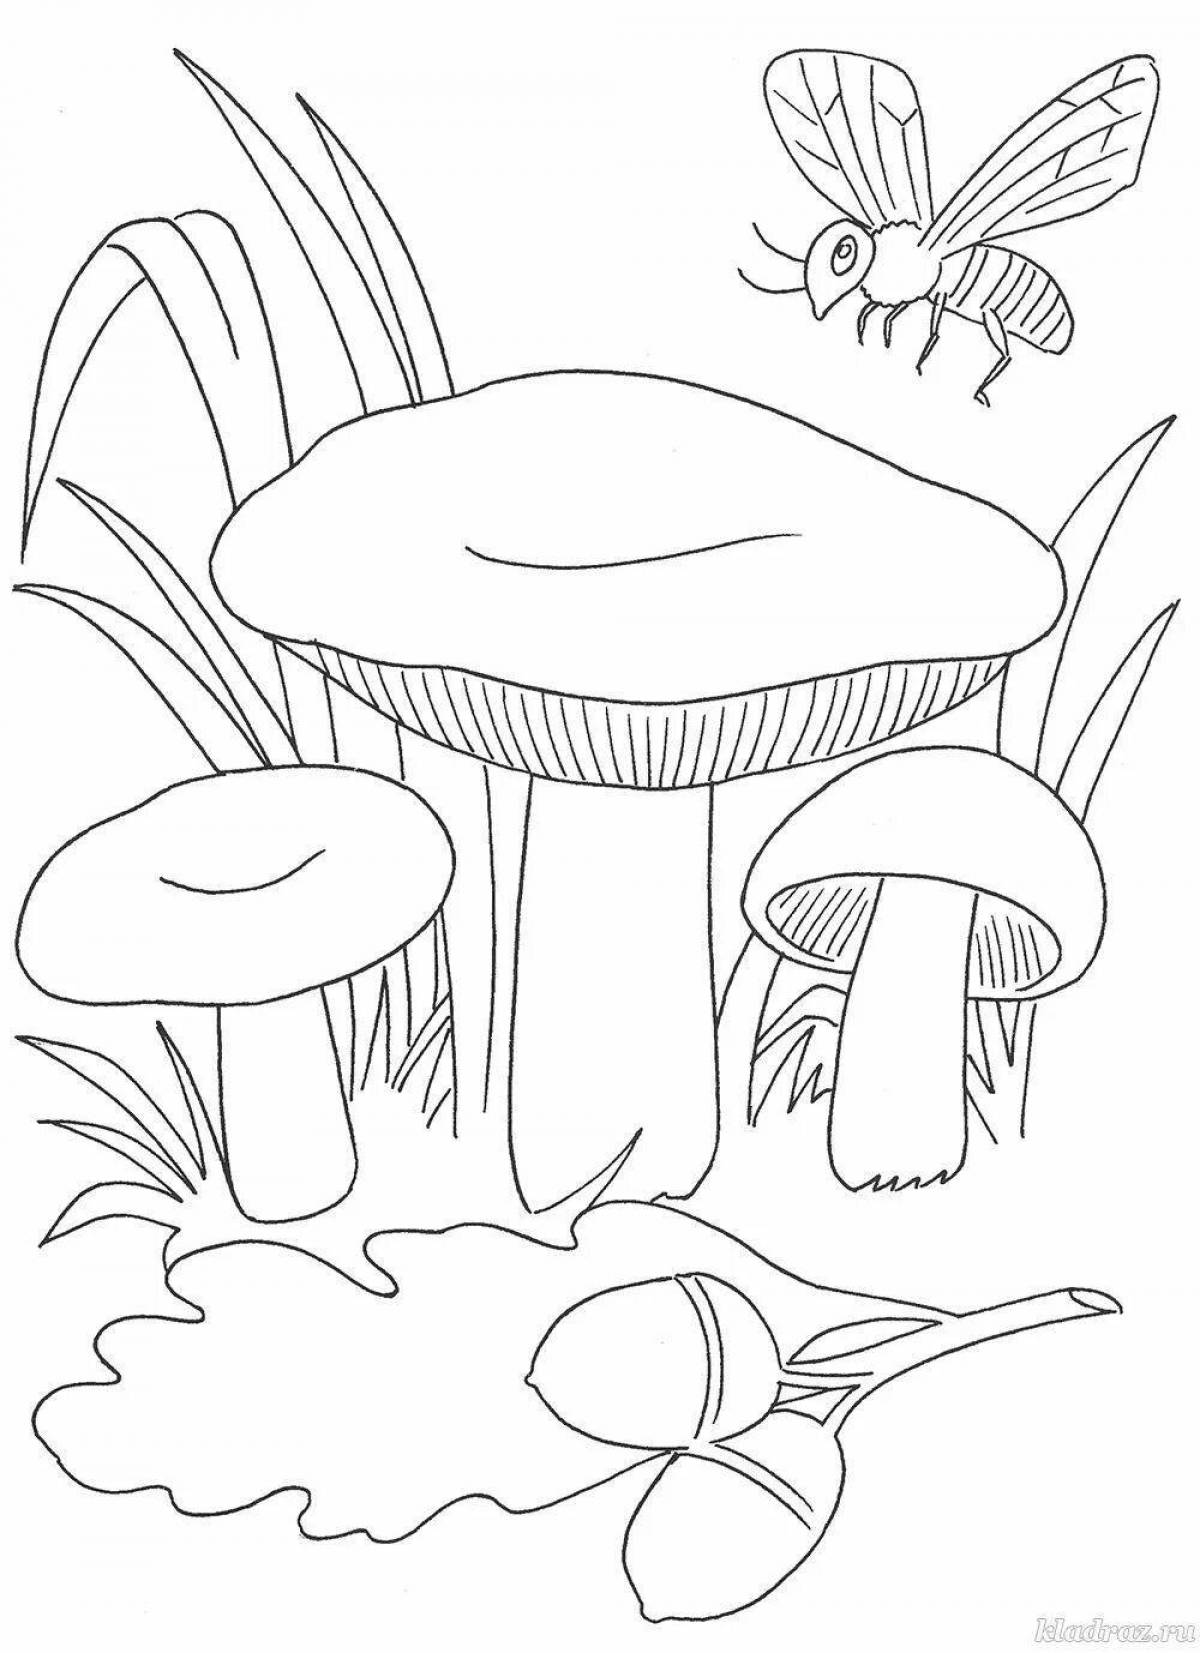 Coloring animated russula